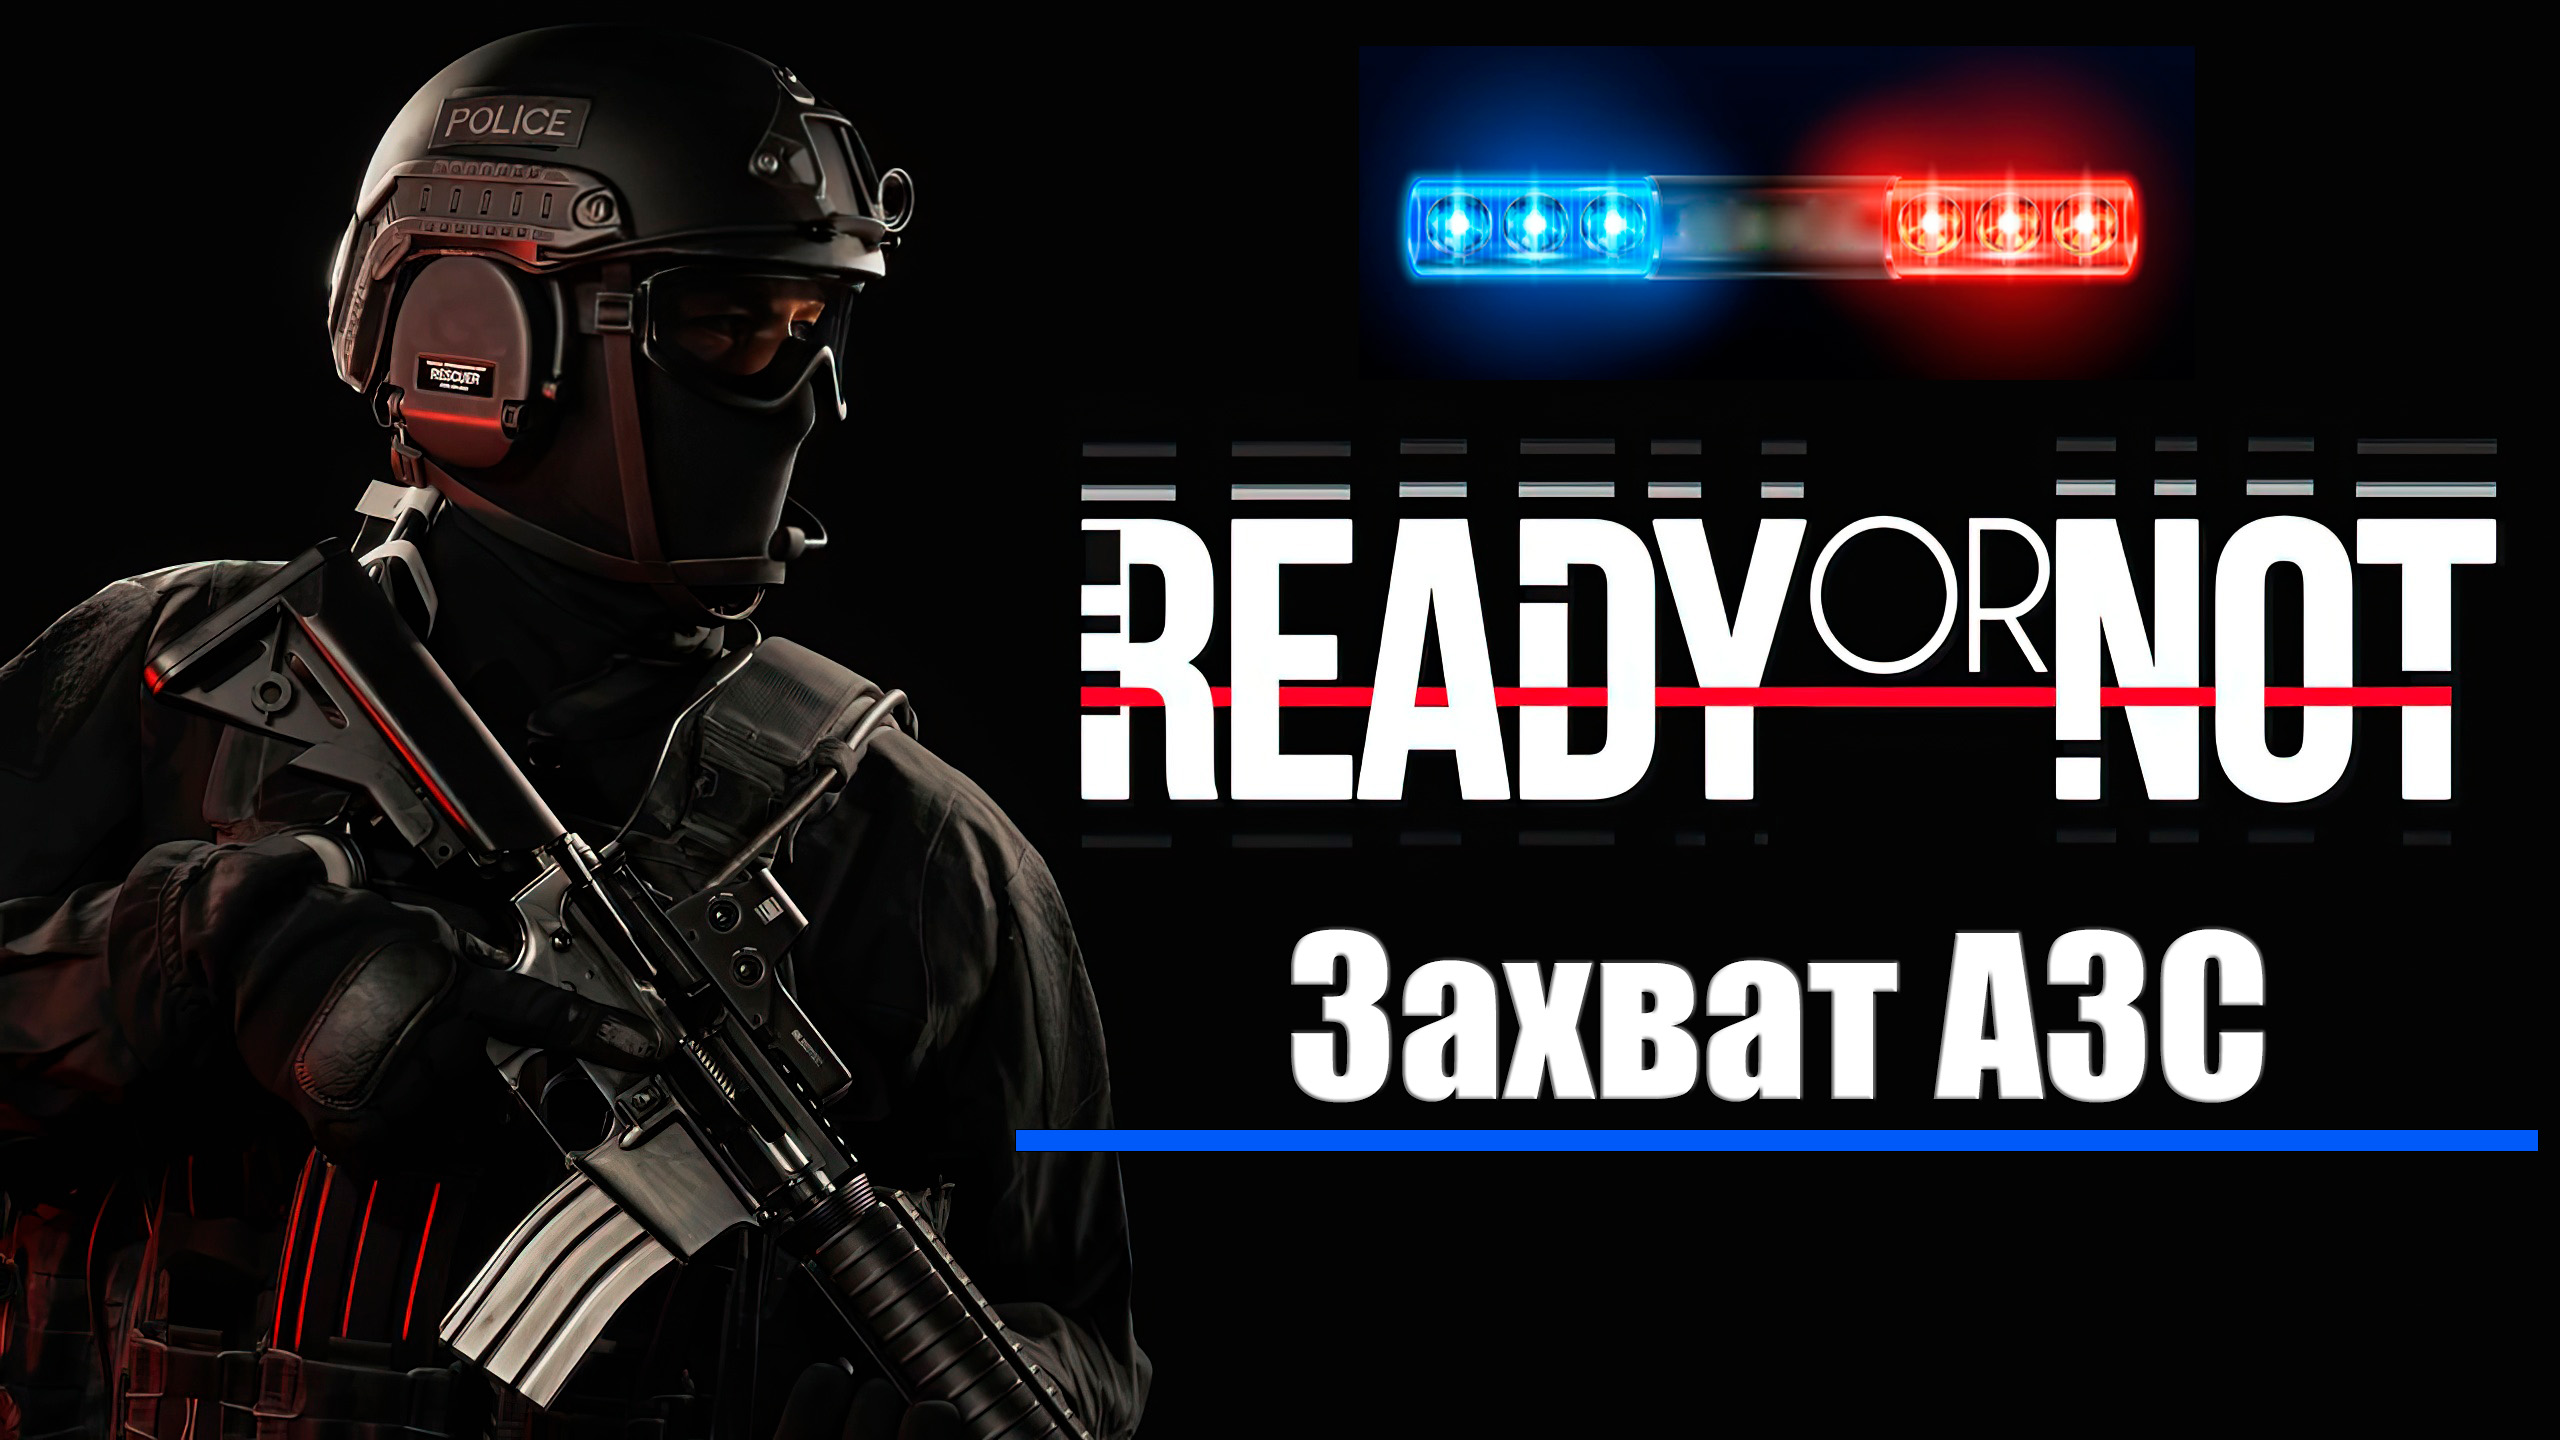 Ready or not карты. Ready or not игра. SWAT 4 АЗС. Обои еа телефон Redi or not.